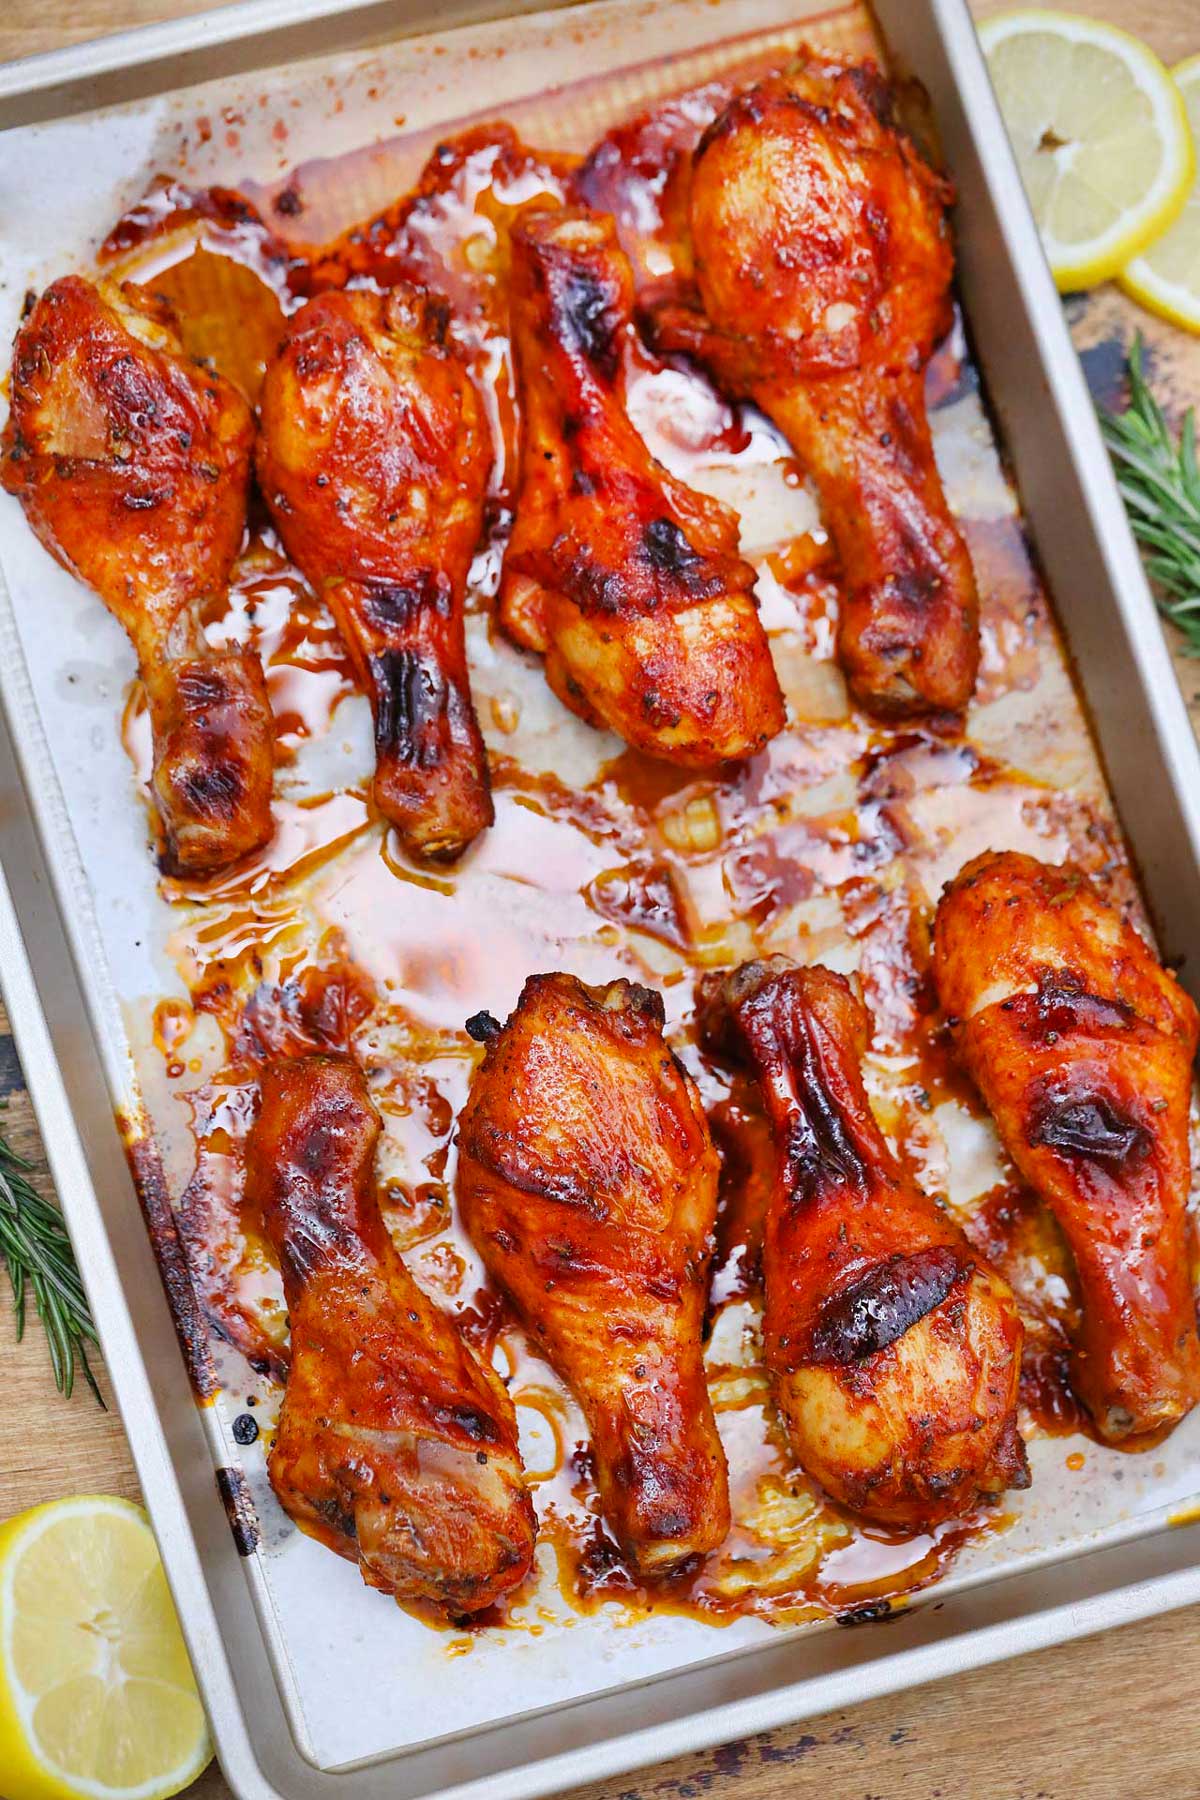 Baked Chicken Legs Crispy Oven Baked Chicken Legs Sweet And Savory Meals